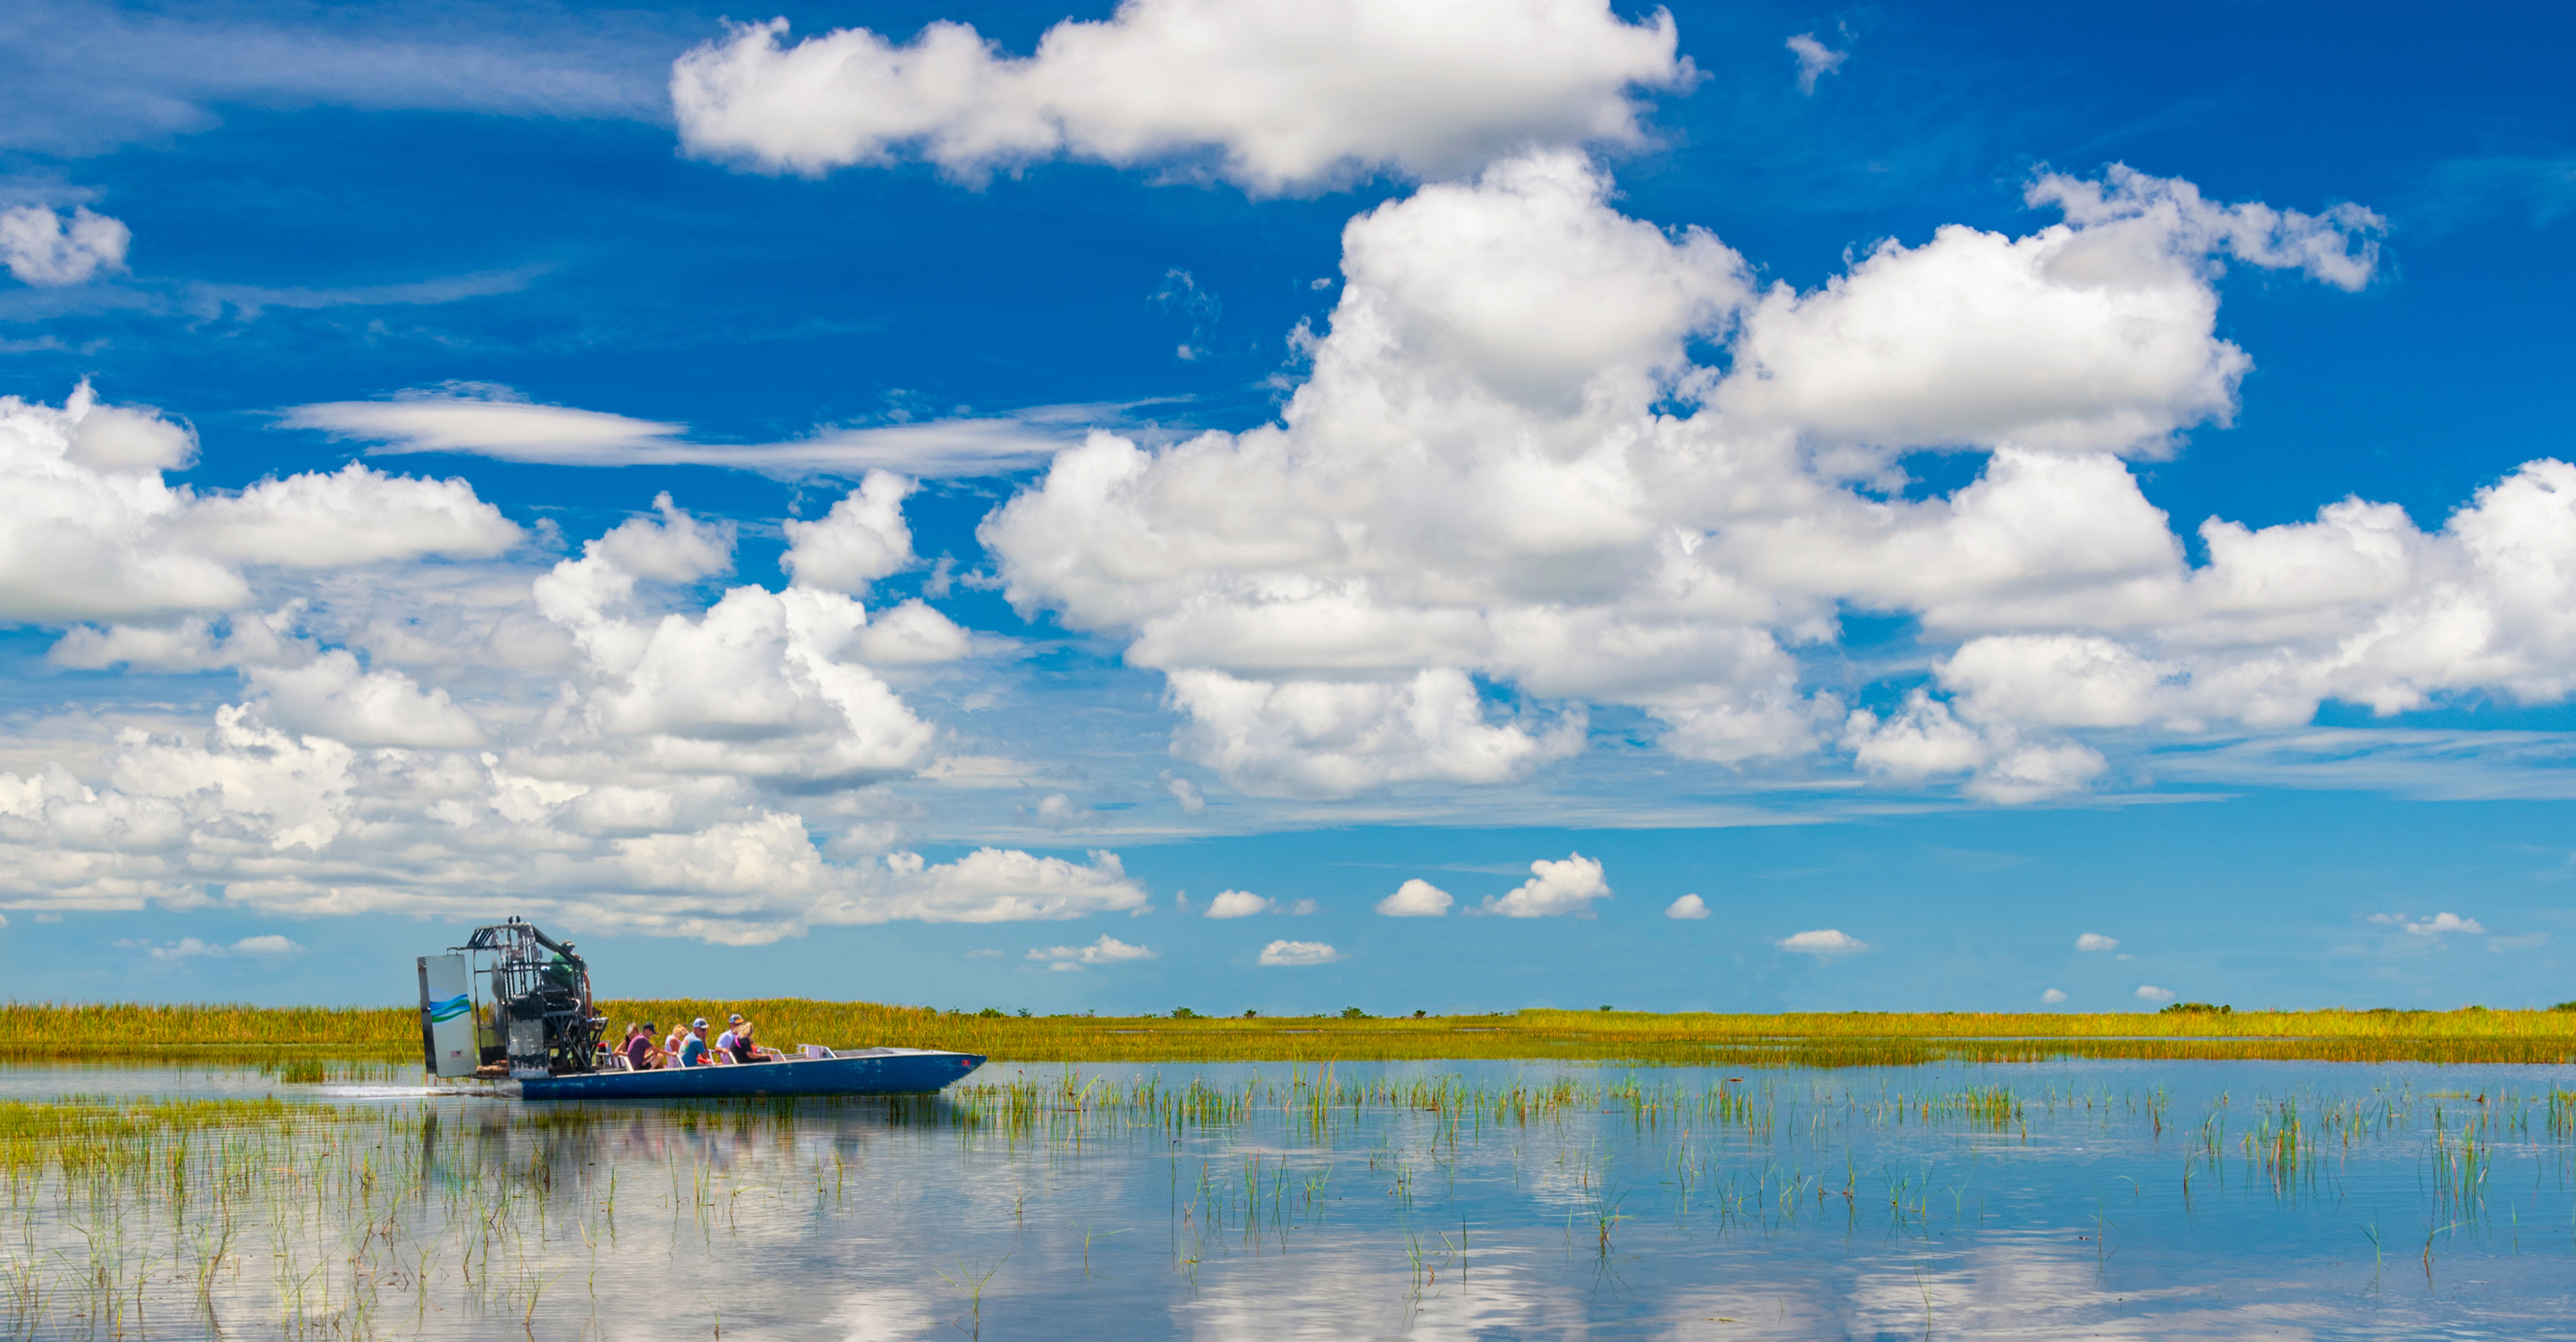 People riding in an airboat in the Everglades National Park, Florida, United States